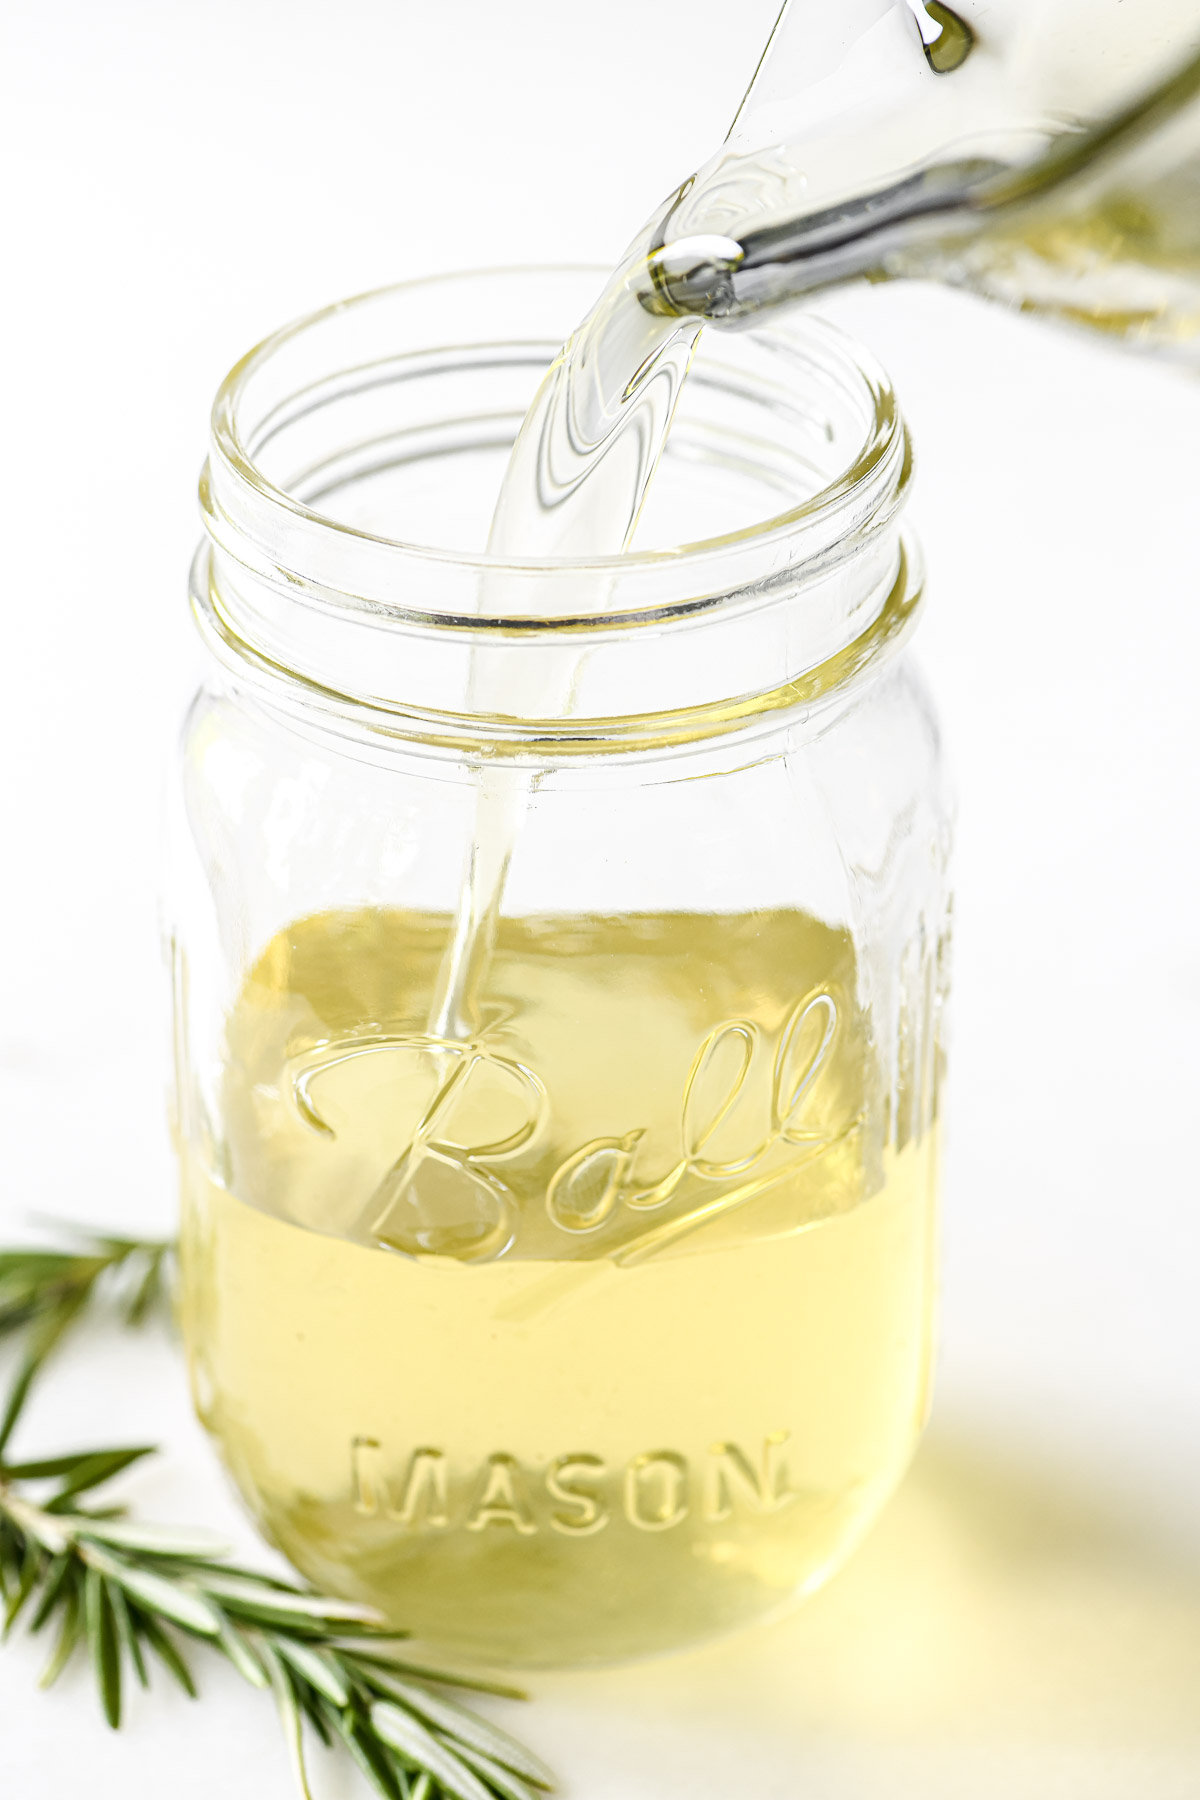 Pour rosemary simple syrup into a mason jar.